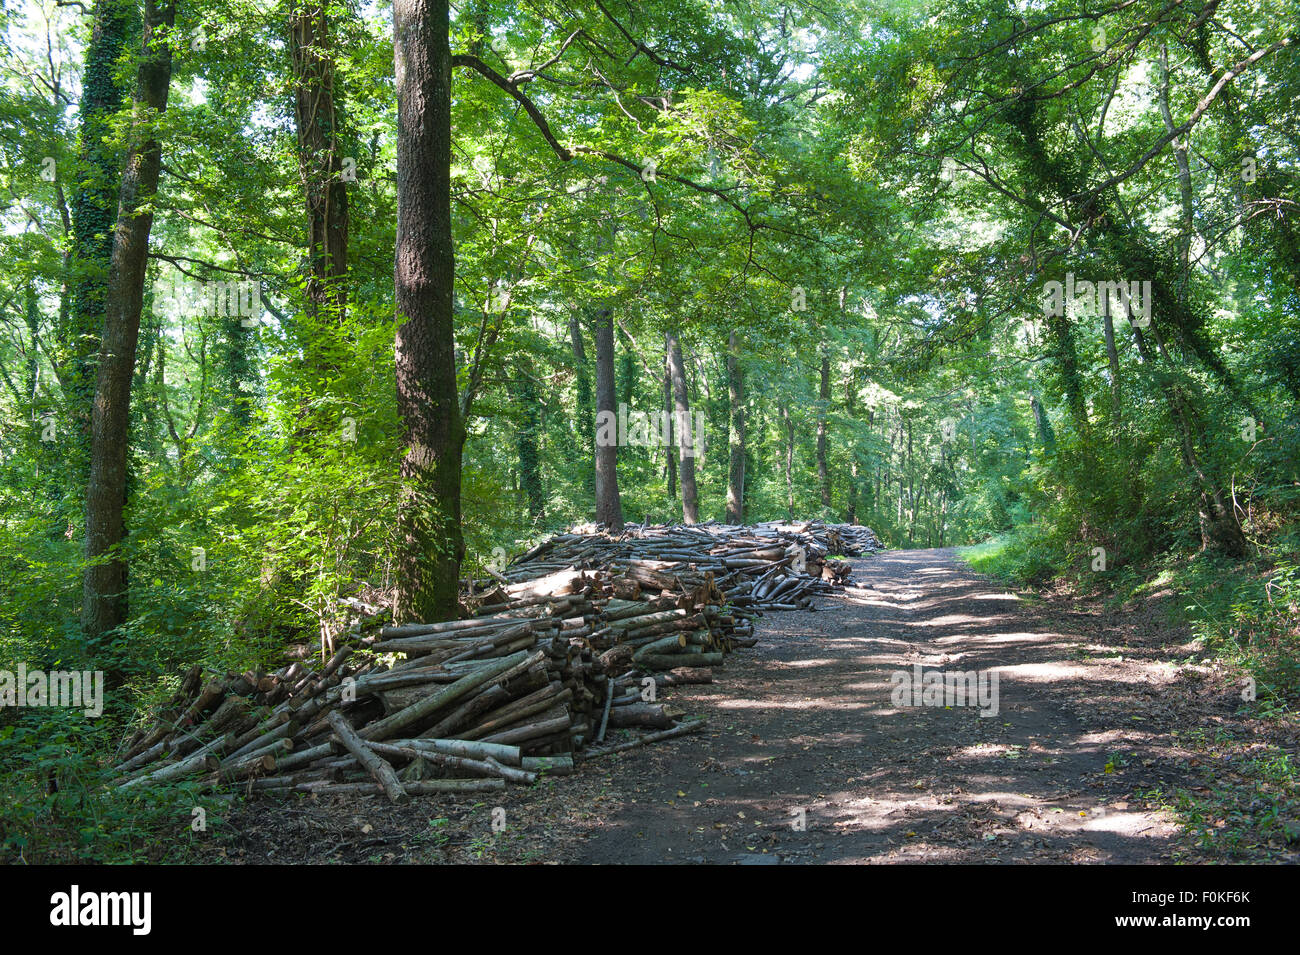 Pile of wood in oak forest with pathway and green tall trees in background Stock Photo